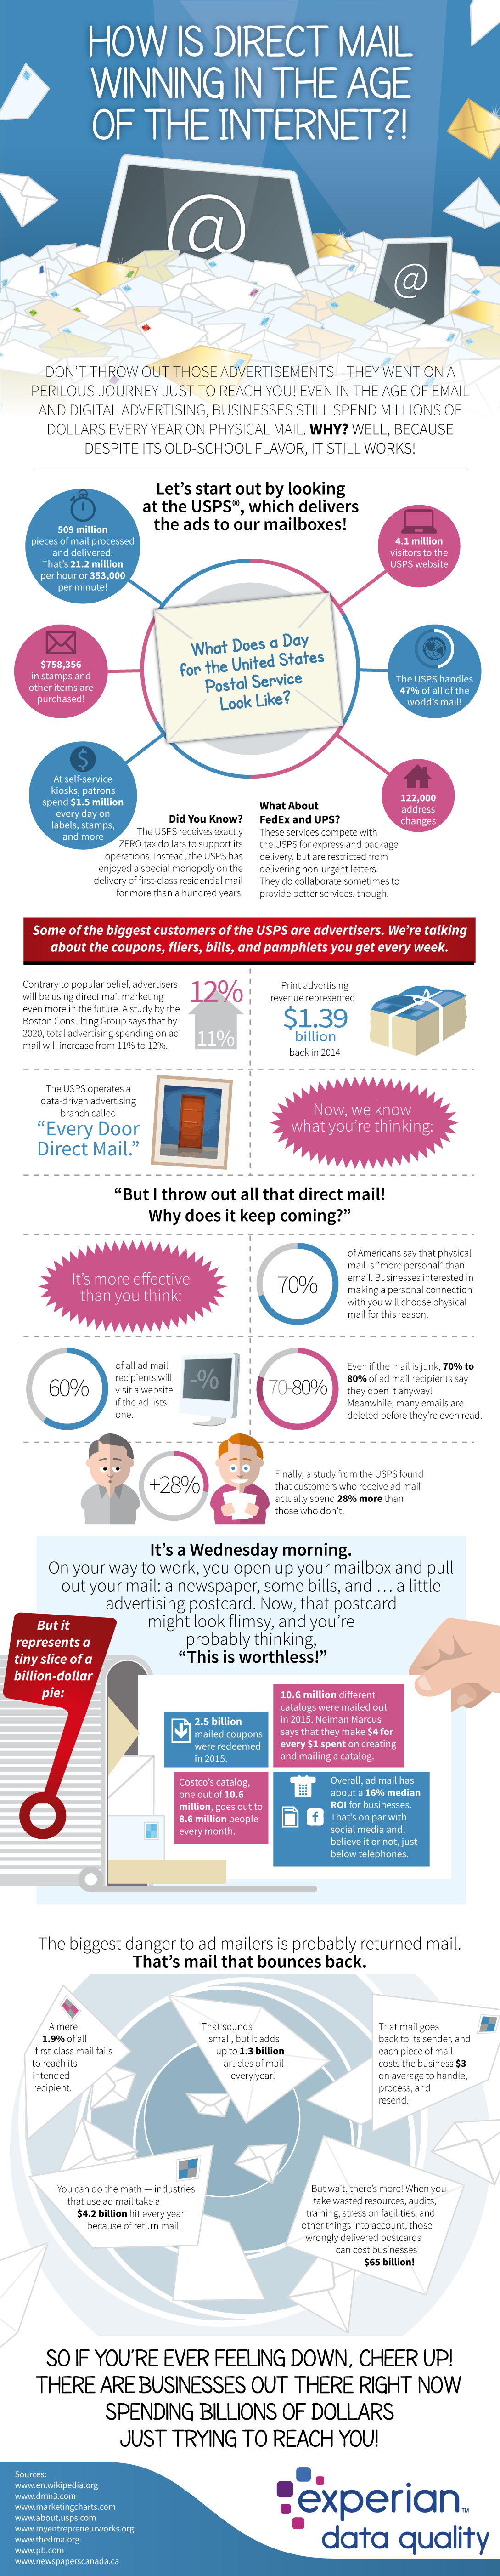 How Direct Mail Is Winning in the Age of the Internet [Infographic]